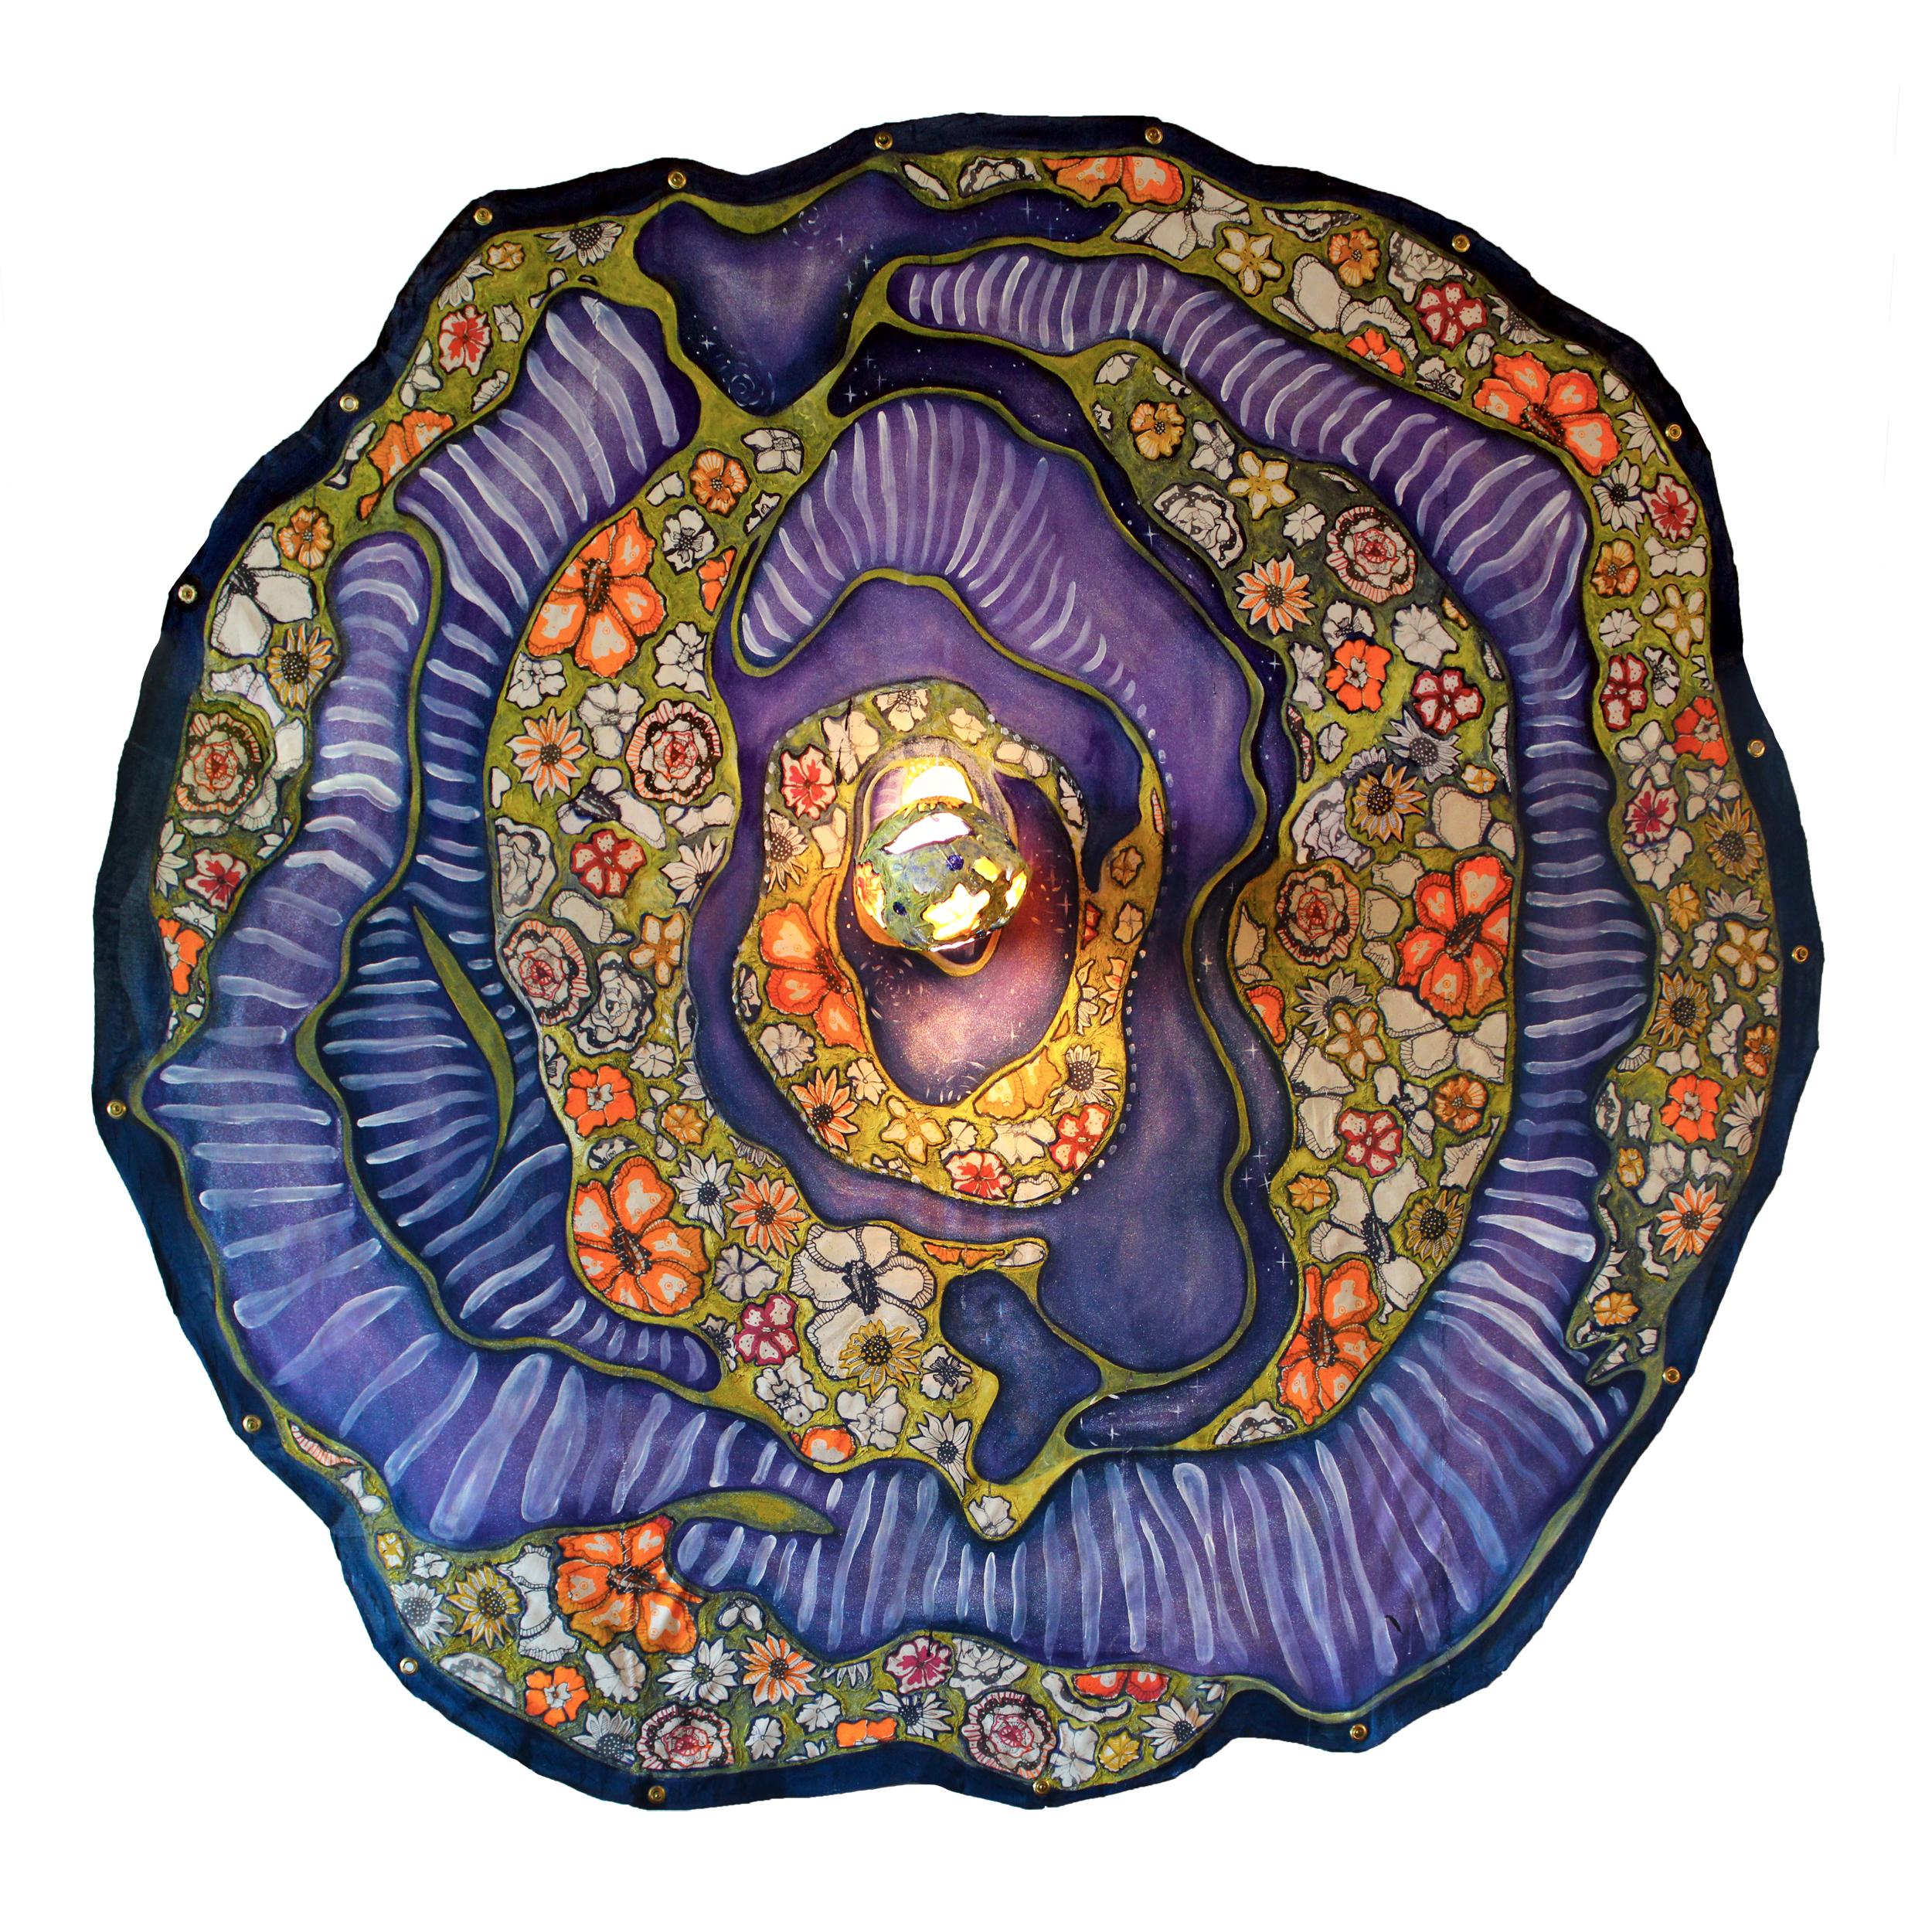 "Yoni Flower #11" by Laurie Shapiro is a unique, mixed media on muslin painting that is signed by the artist on the front. The artist created this original work using acrylic, hand-sewn textile, and screen print. There is an orb extending through